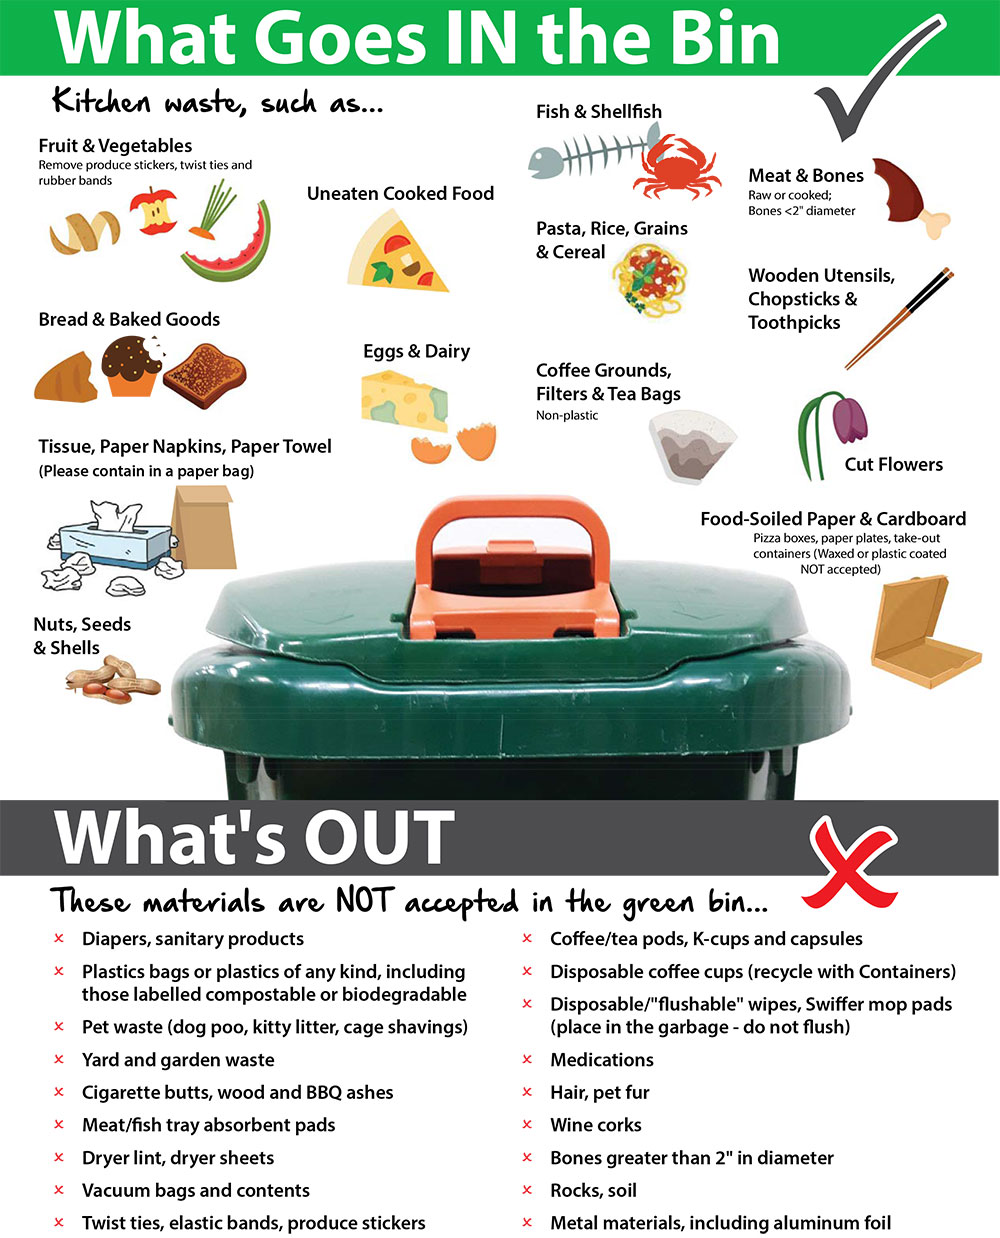 Fruit and Veggie Storage Guide - Napa Recycling and Waste Services